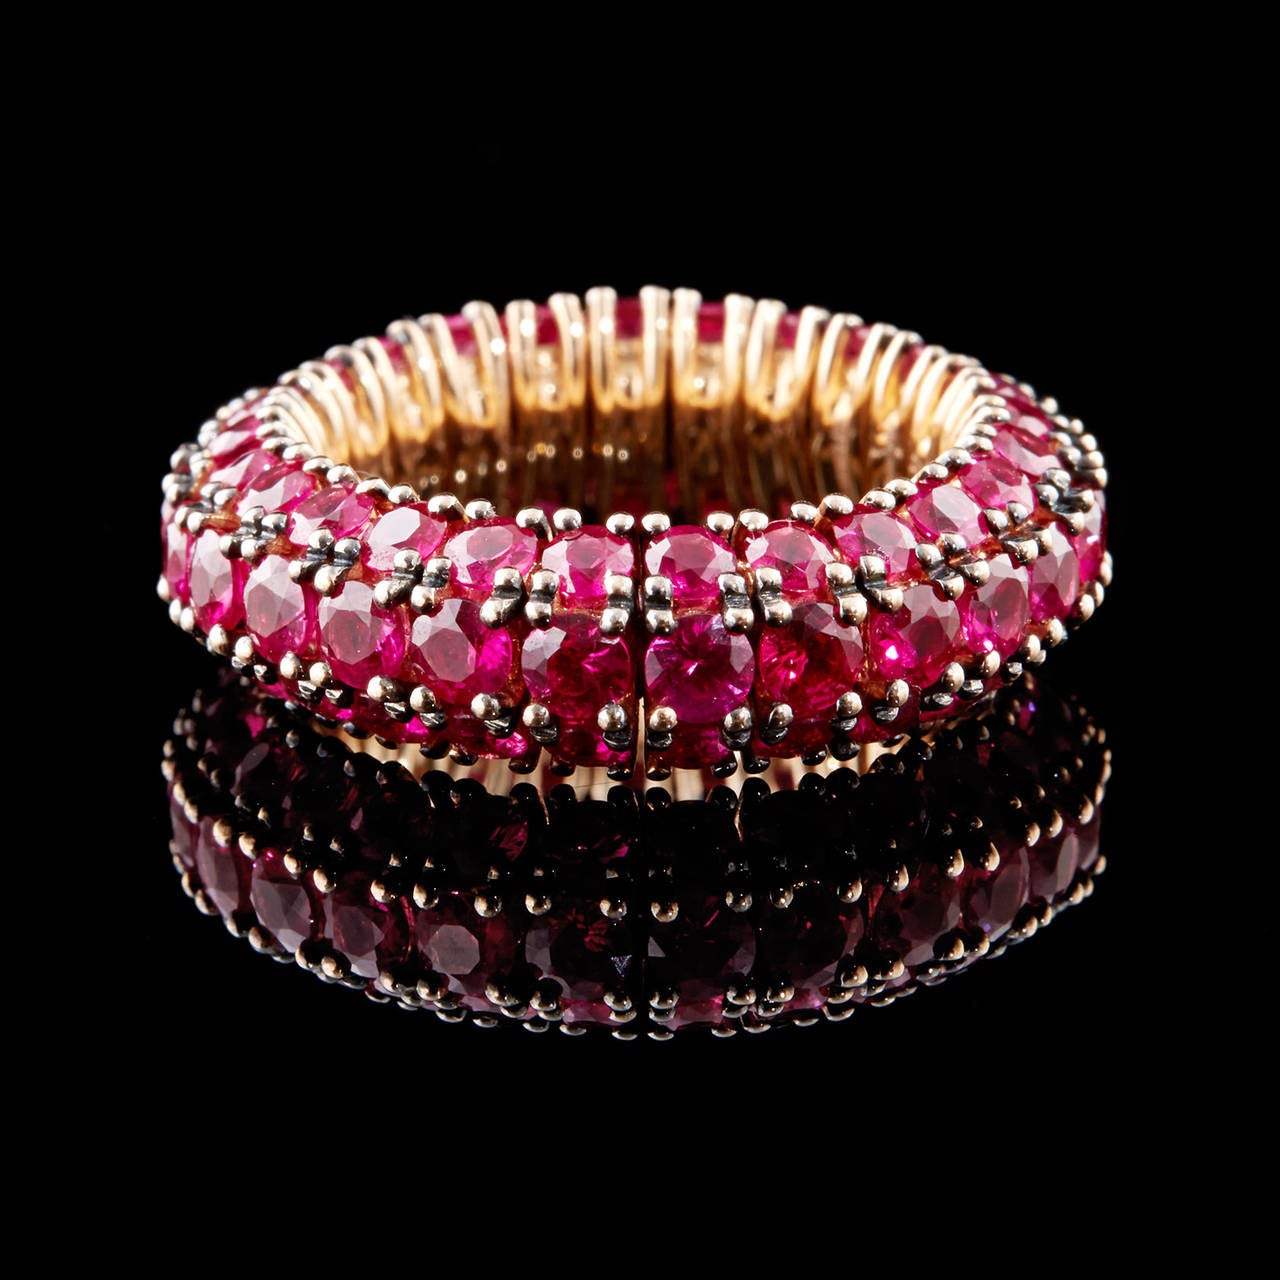 Mattia Cielo 18Kt Yellow Gold Flexible Universo 3 Pietre Band Ring with 6.65 Carat Total Weight of Rubies. This vibrant ruby red band is 7.2 mm in width & fits a finger size 6.25.  The total weight is 8.8 grams.